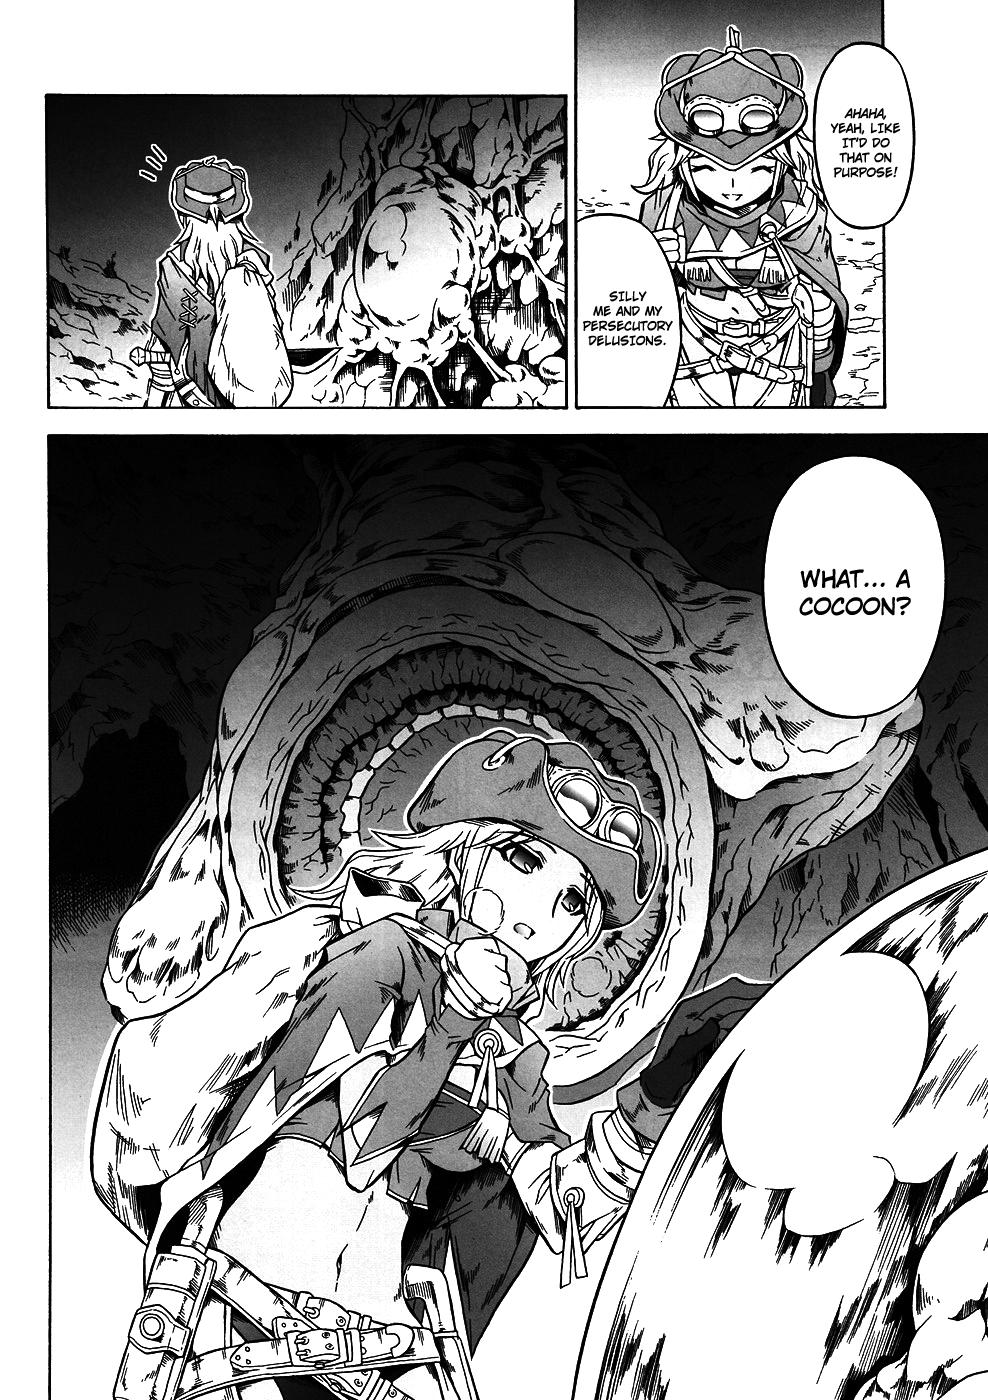 Anal Licking Solo Hunter no Seitai 4: The First Part - Monster hunter Venezuela - Page 5